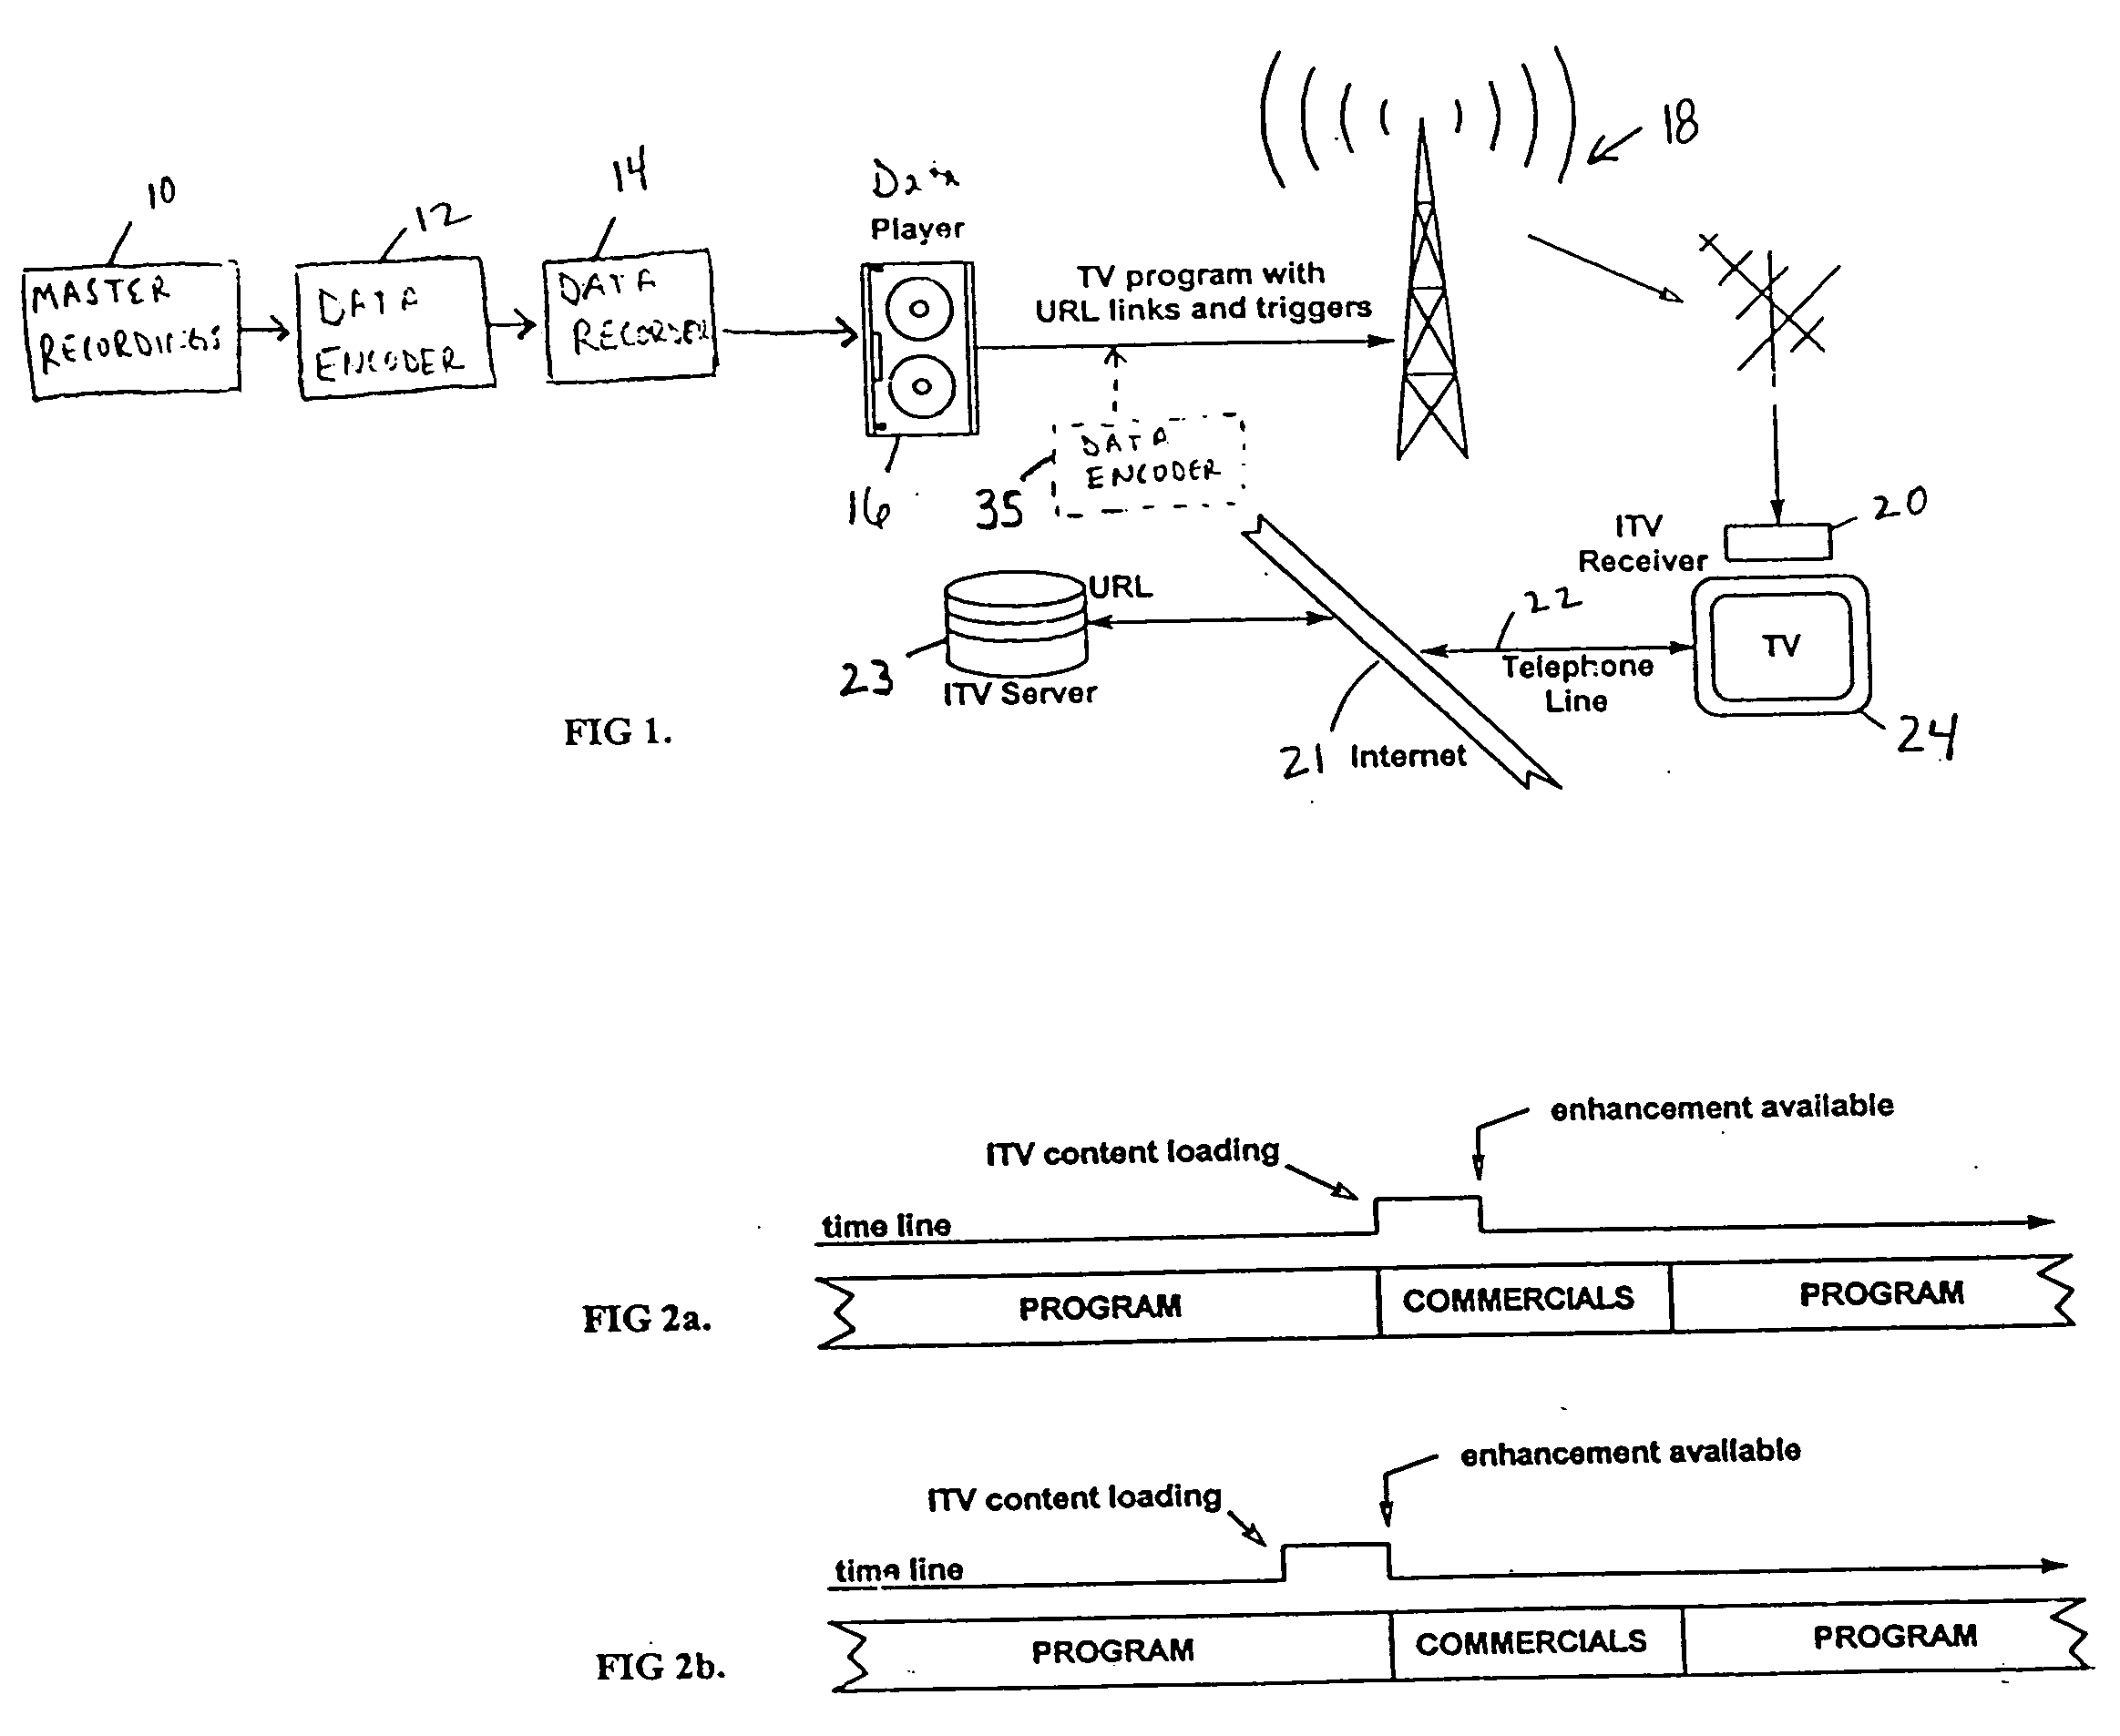 System and method for transmitting and displaying interactive TV content